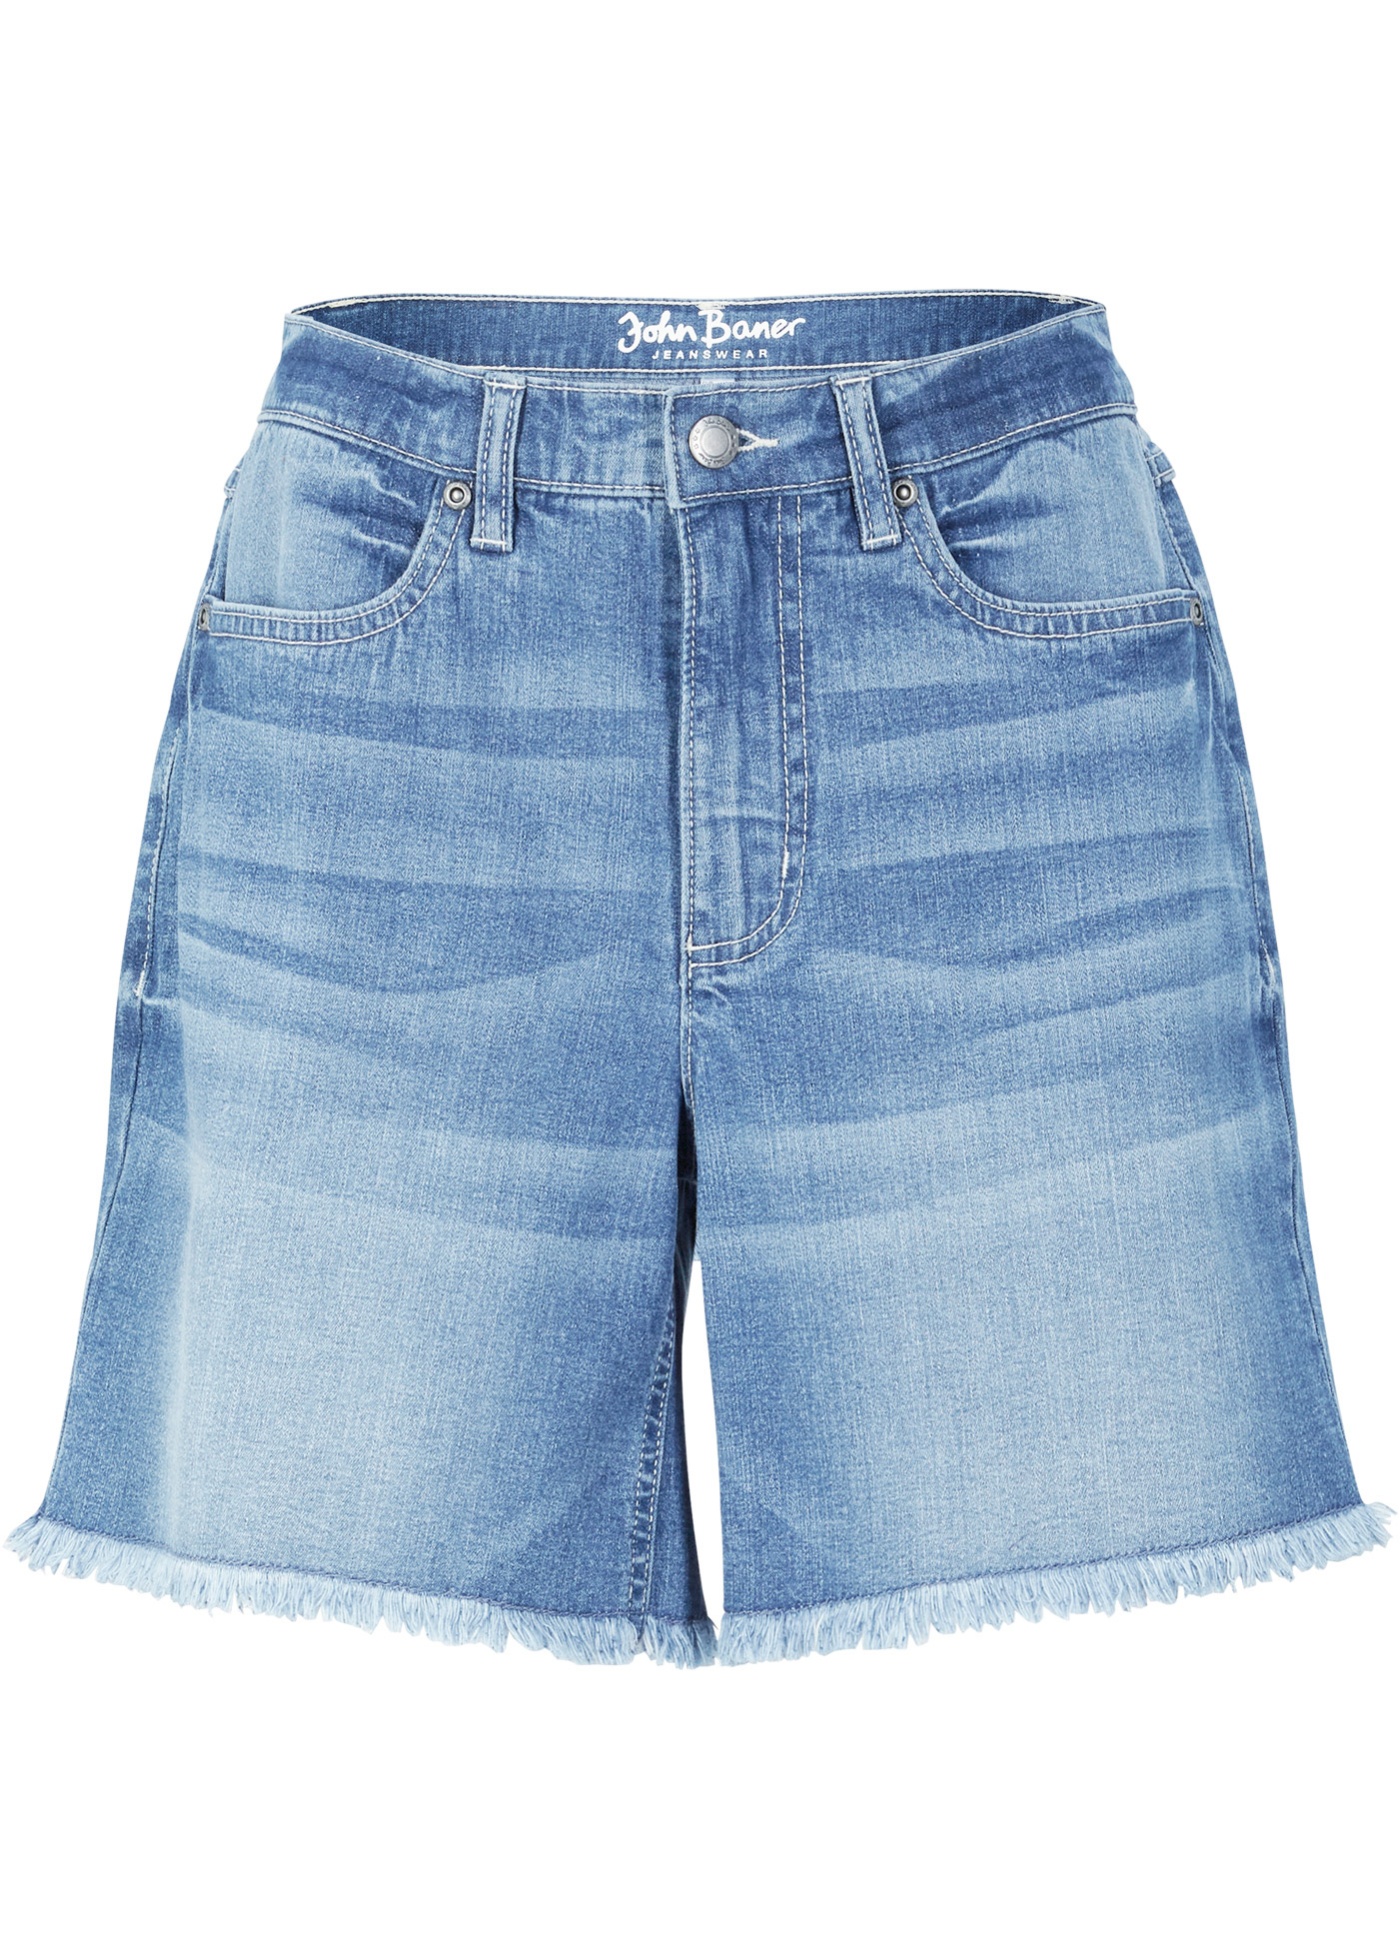 Stretch jeans short